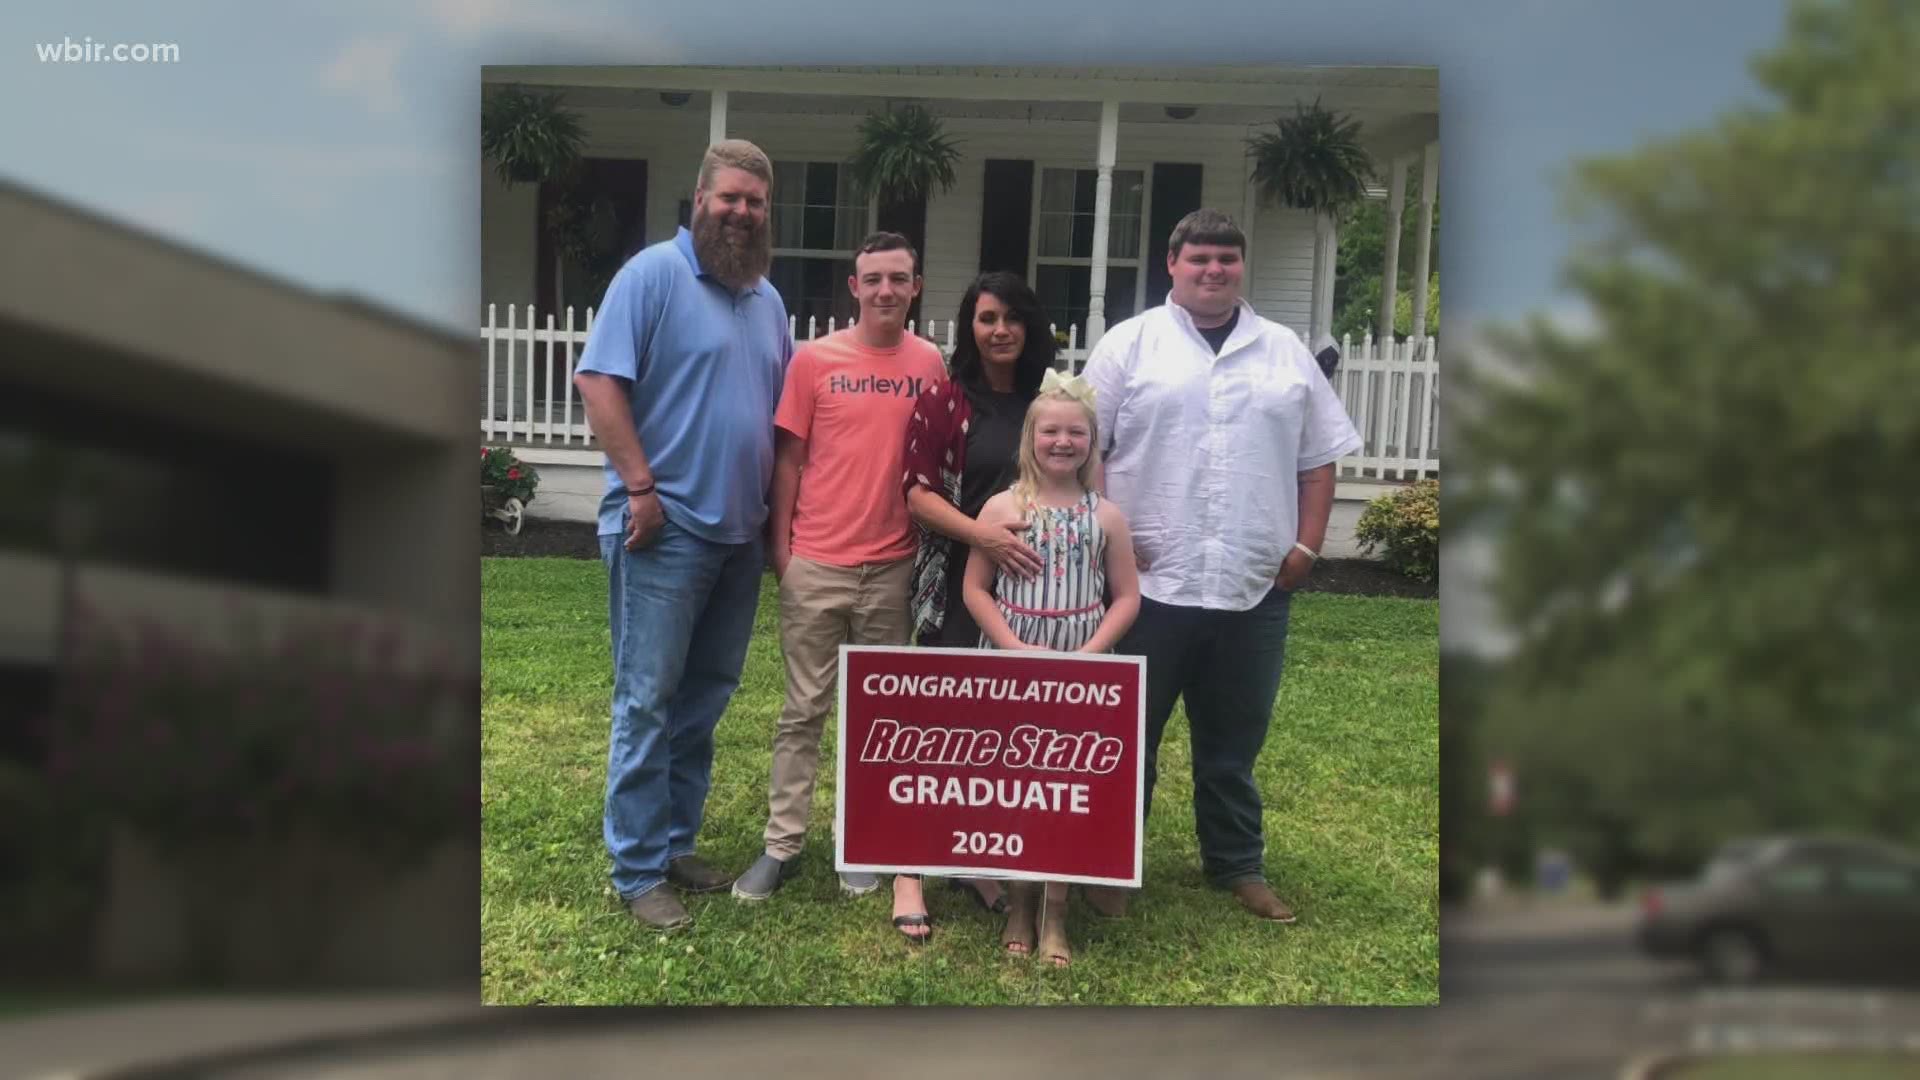 This summer, a Roane State student has two things to celebrate: her degree, and 10 years of sobriety.